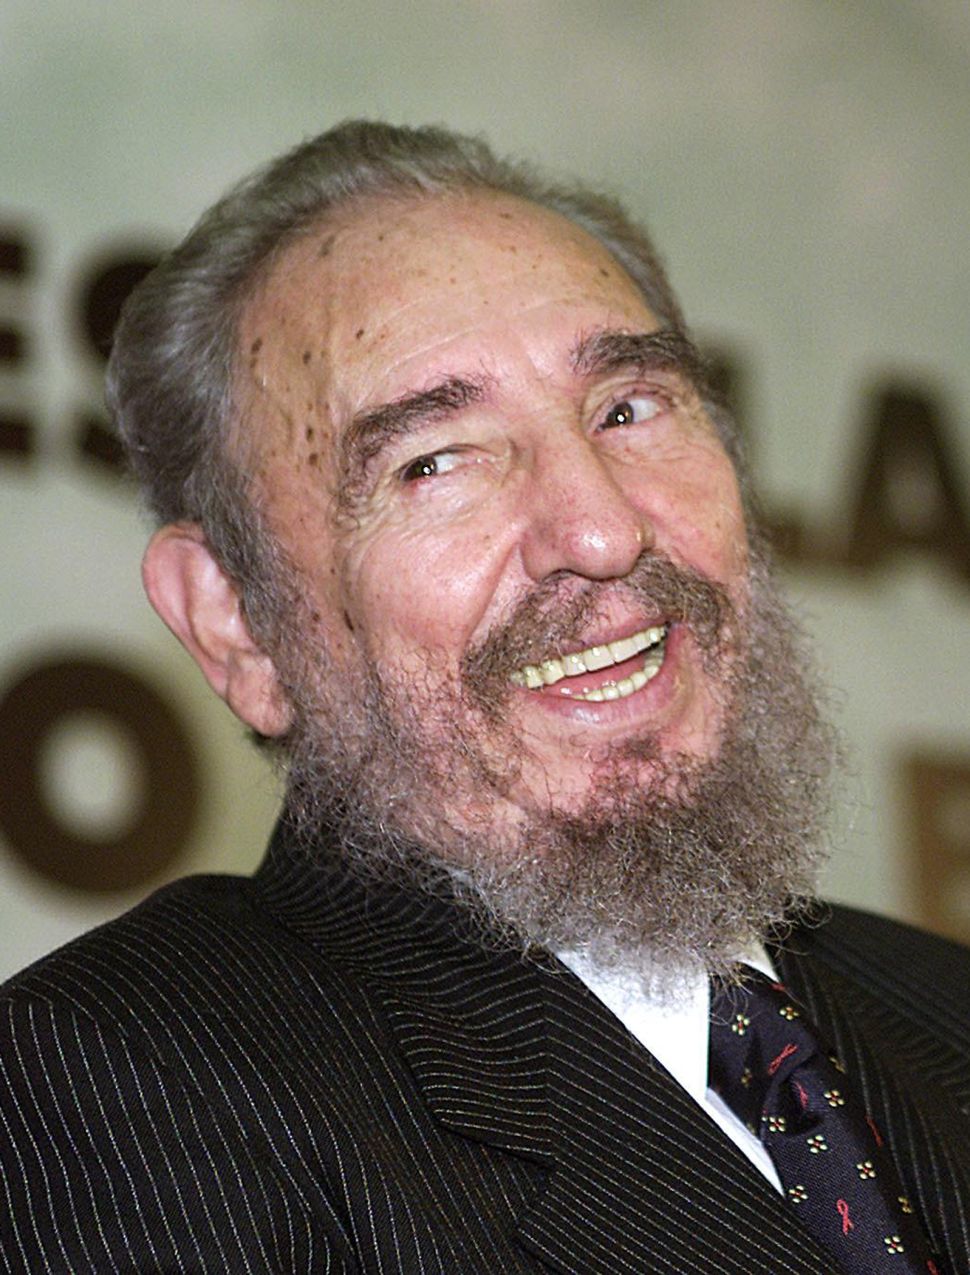 Fidel Castro having a great time in 2003 at the Ministry of Education in Brazil.